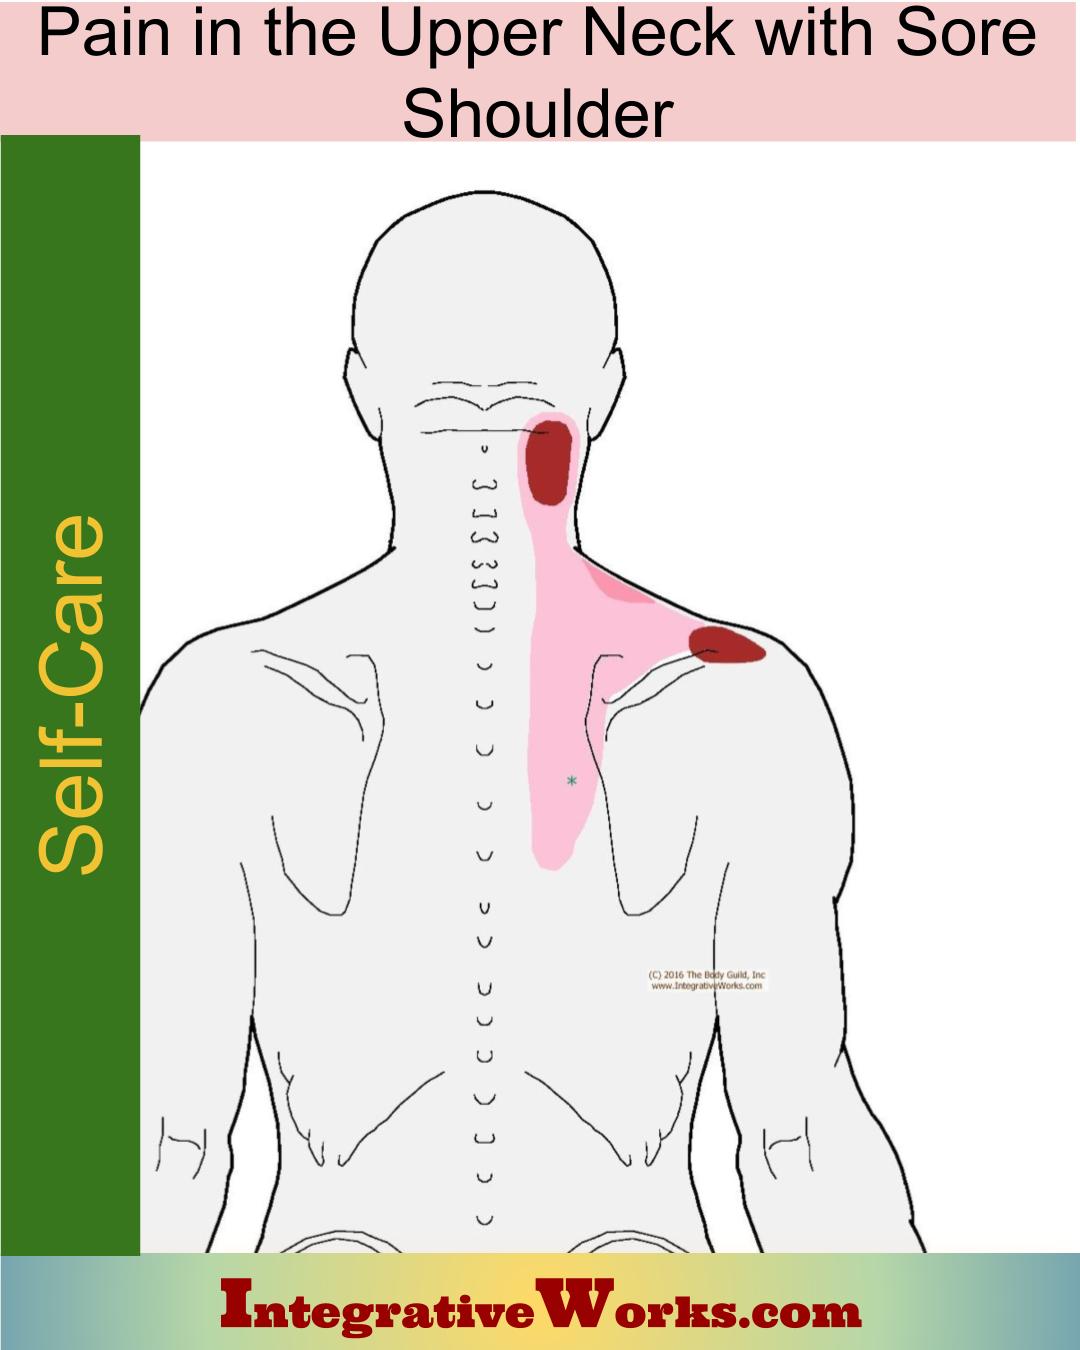 Self Care – Neck Pain with Sore Shoulder